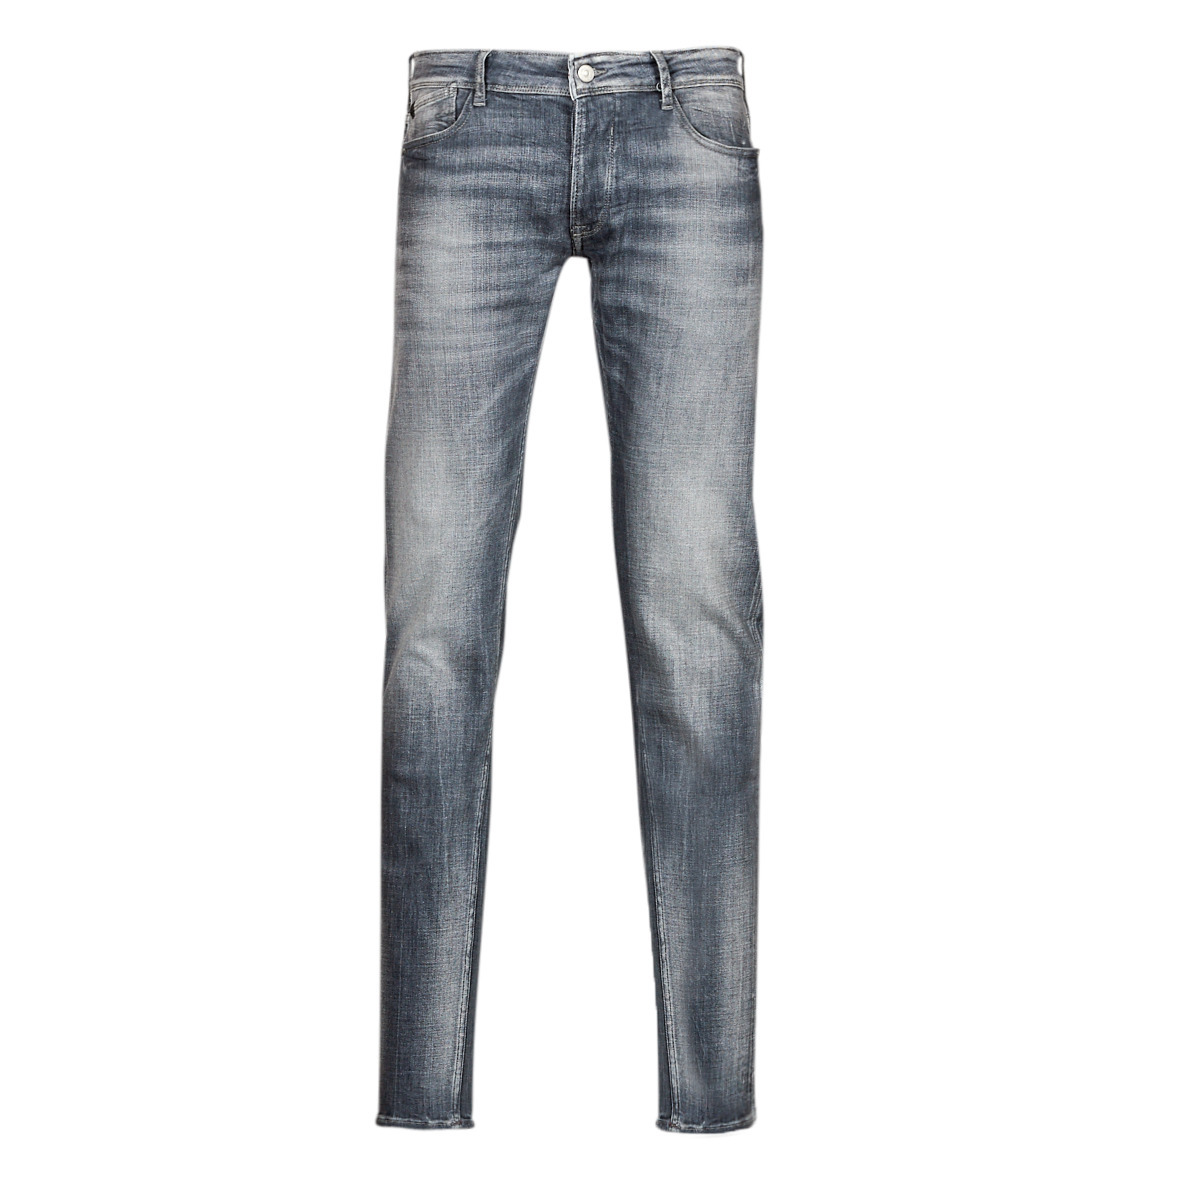 Spartoo Skinny Jeans Grey for Men from Le Temps des Cerises GOOFASH